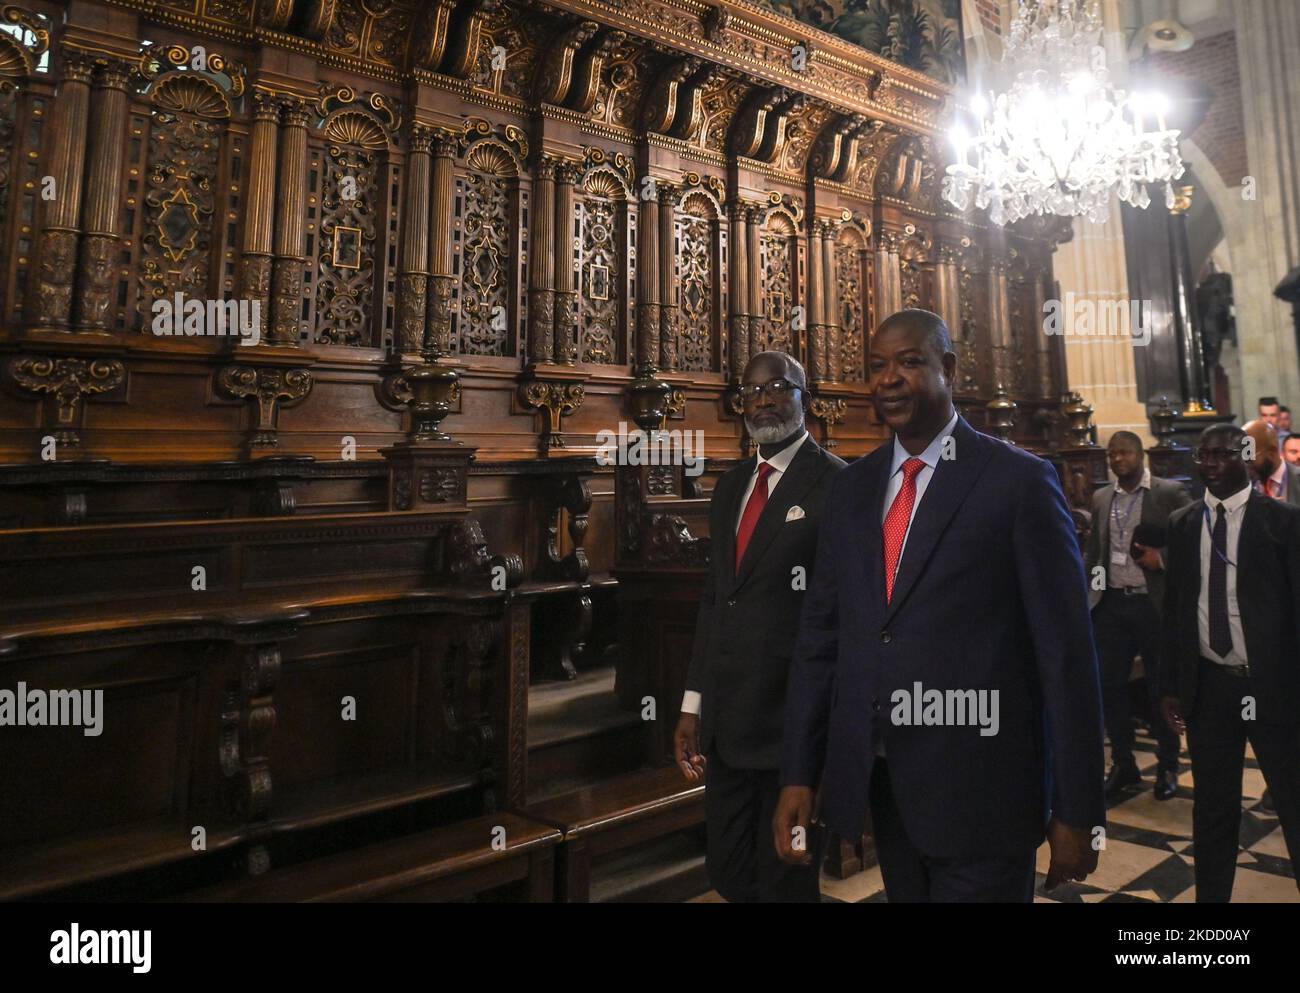 Nuno Gomes Nabiam (R), Prime Minister of Guinea-Bissau and Fidelis Forbs (L), Minister of Public Works, Housing and Urban Planning of Guinea-Bissau during the visit of Wawel Castle in Krakow. Both politicians traveled to Poland to take part in a major United Nations conference on urban development in Katowice this week. On Wednesday, June 29, 2022, in Wawel Castle, Krakow, Poland. (Photo by Artur Widak/NurPhoto) Stock Photo